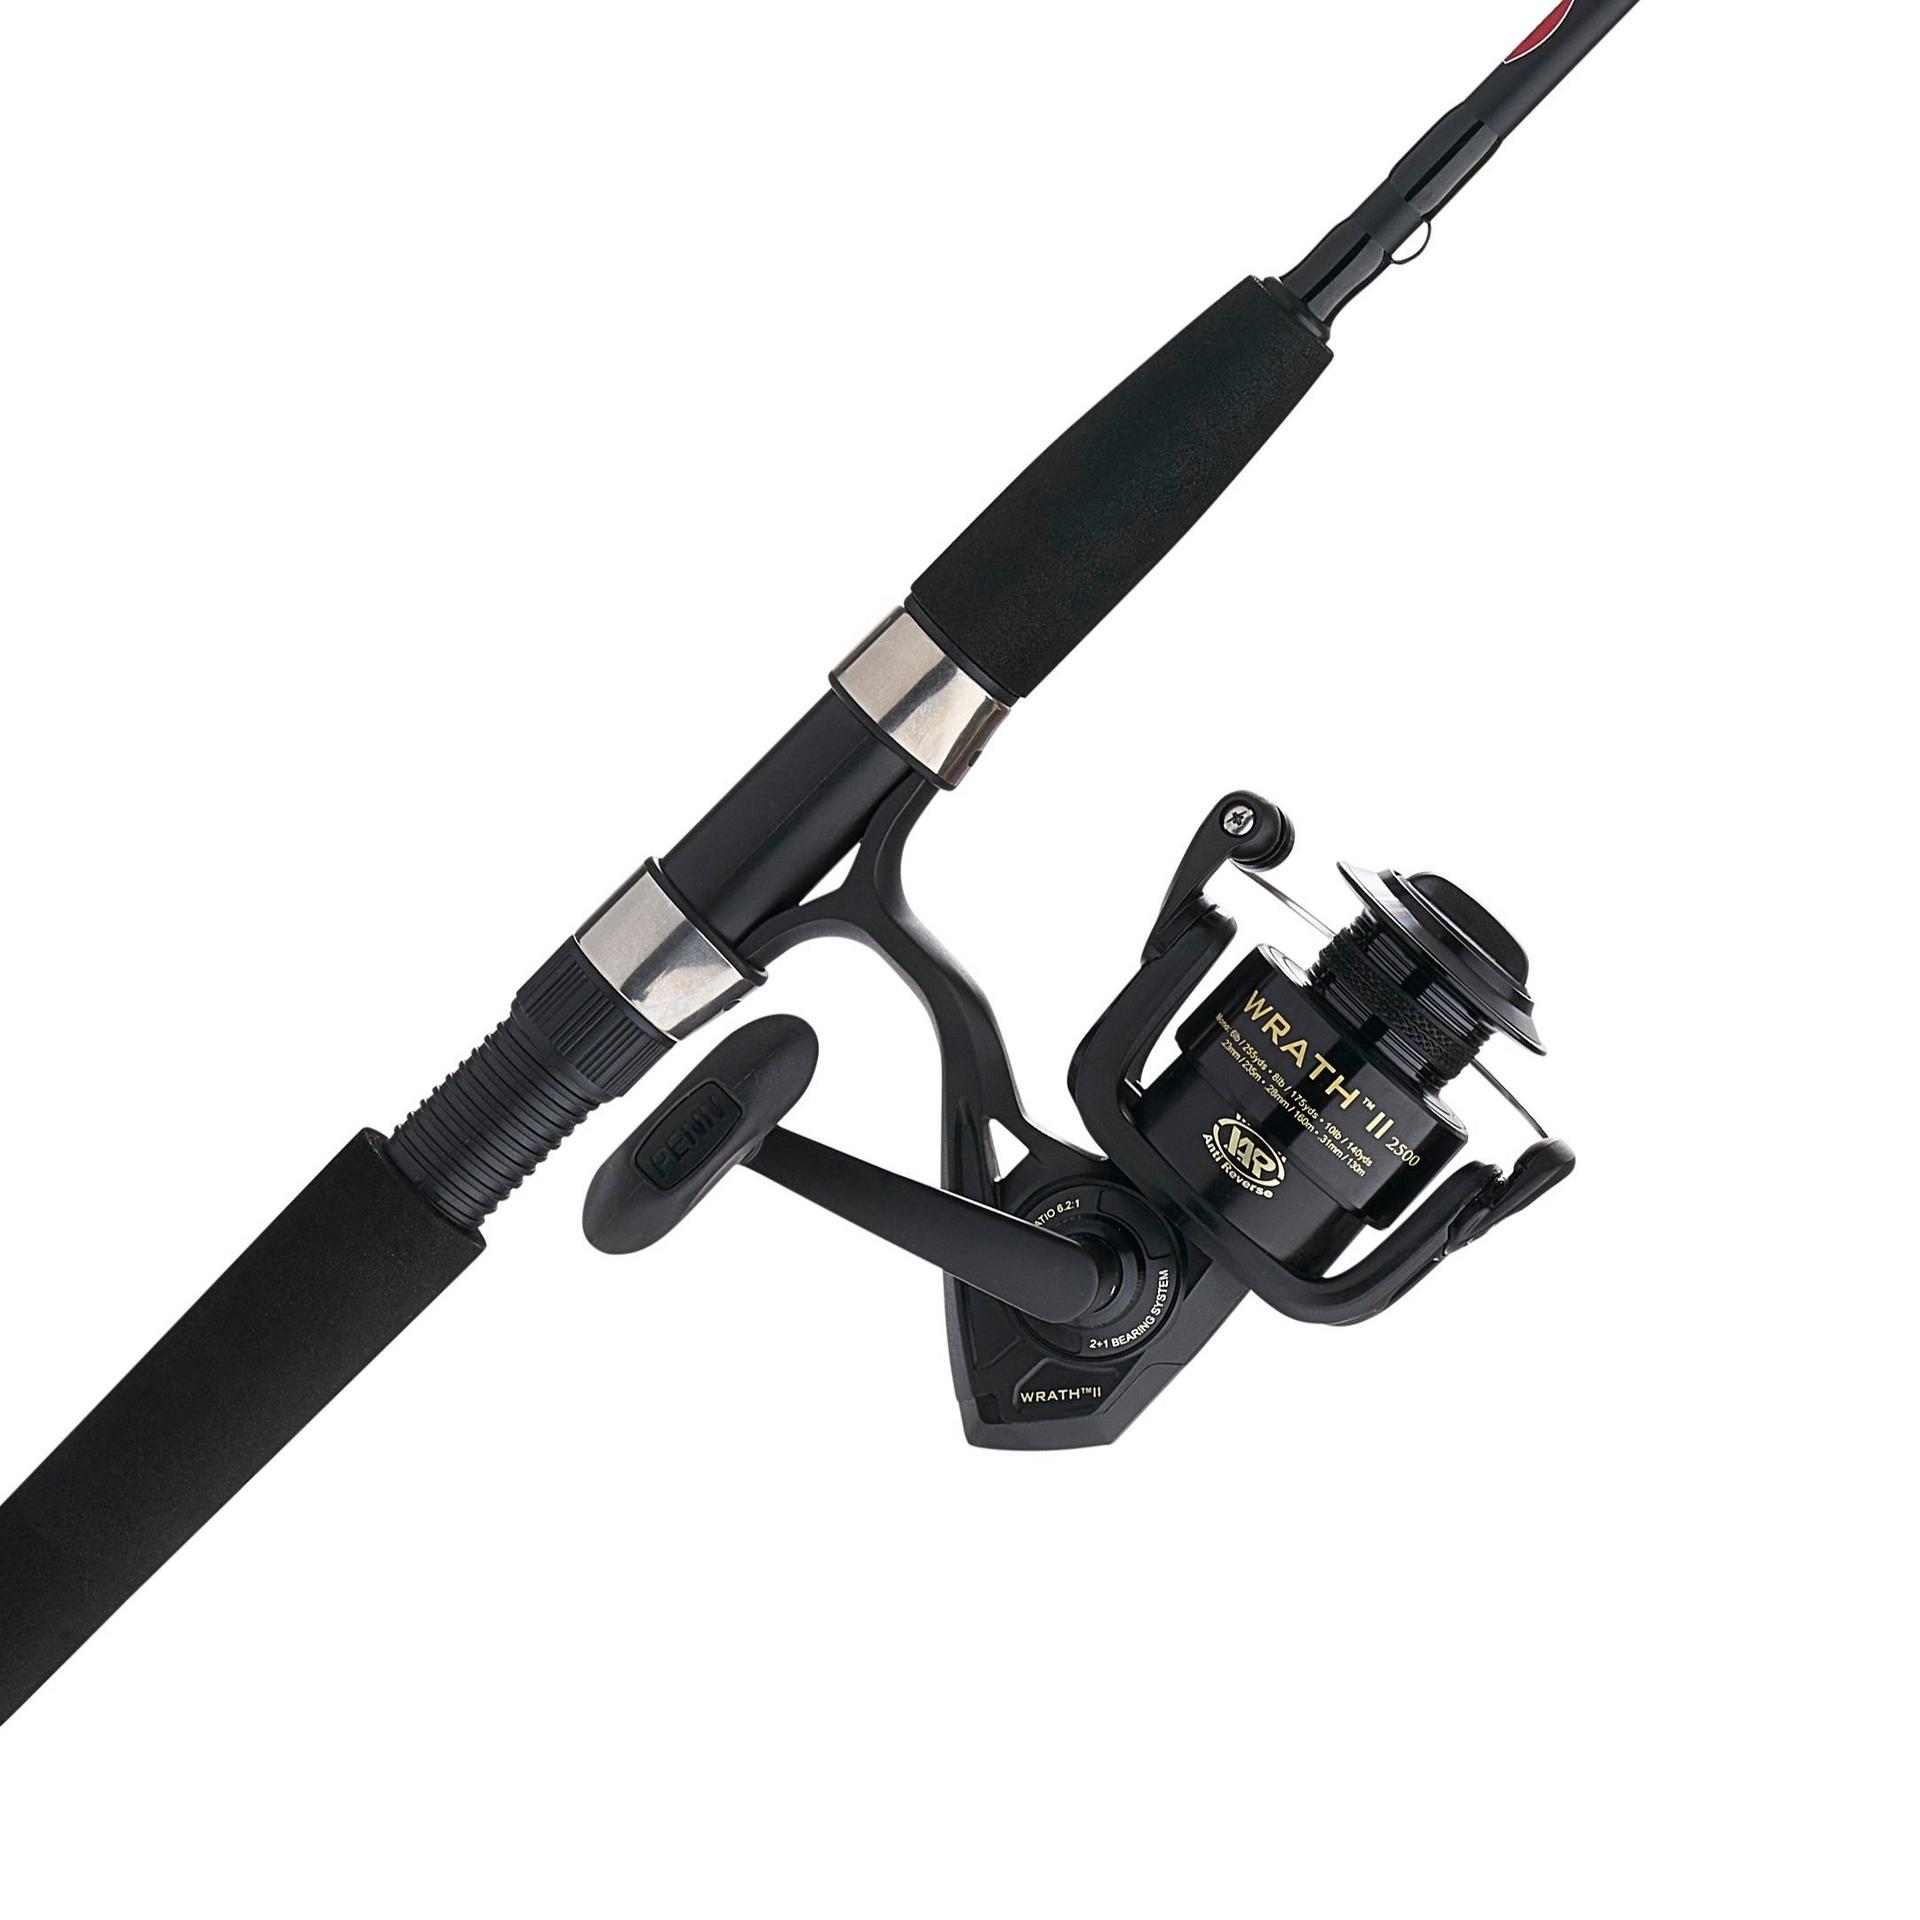 NOW AVAILABLE 4 80lb Penn rods with rollers top to bottom. All